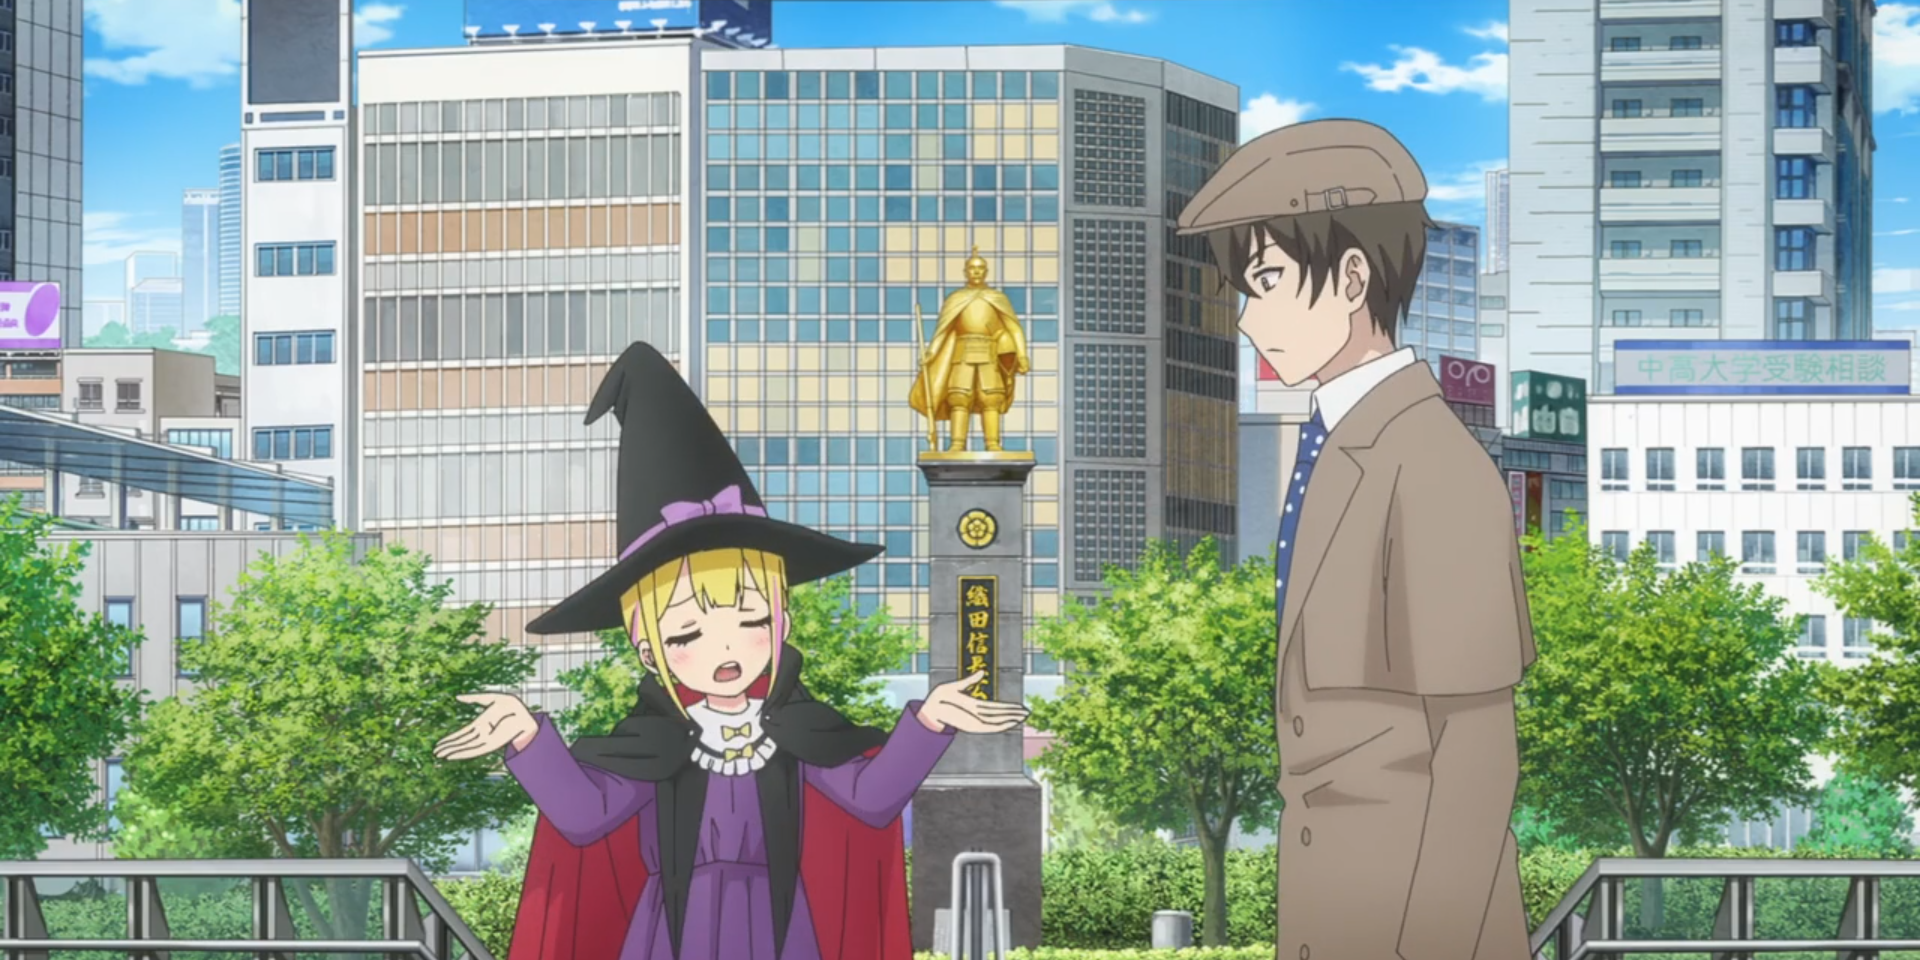 Sousuke and Sara in Halloween costumes - Sara as a witch, Sousuke as a detective - talk near a golden statue, while Sara's arms are outstretched in resignation.